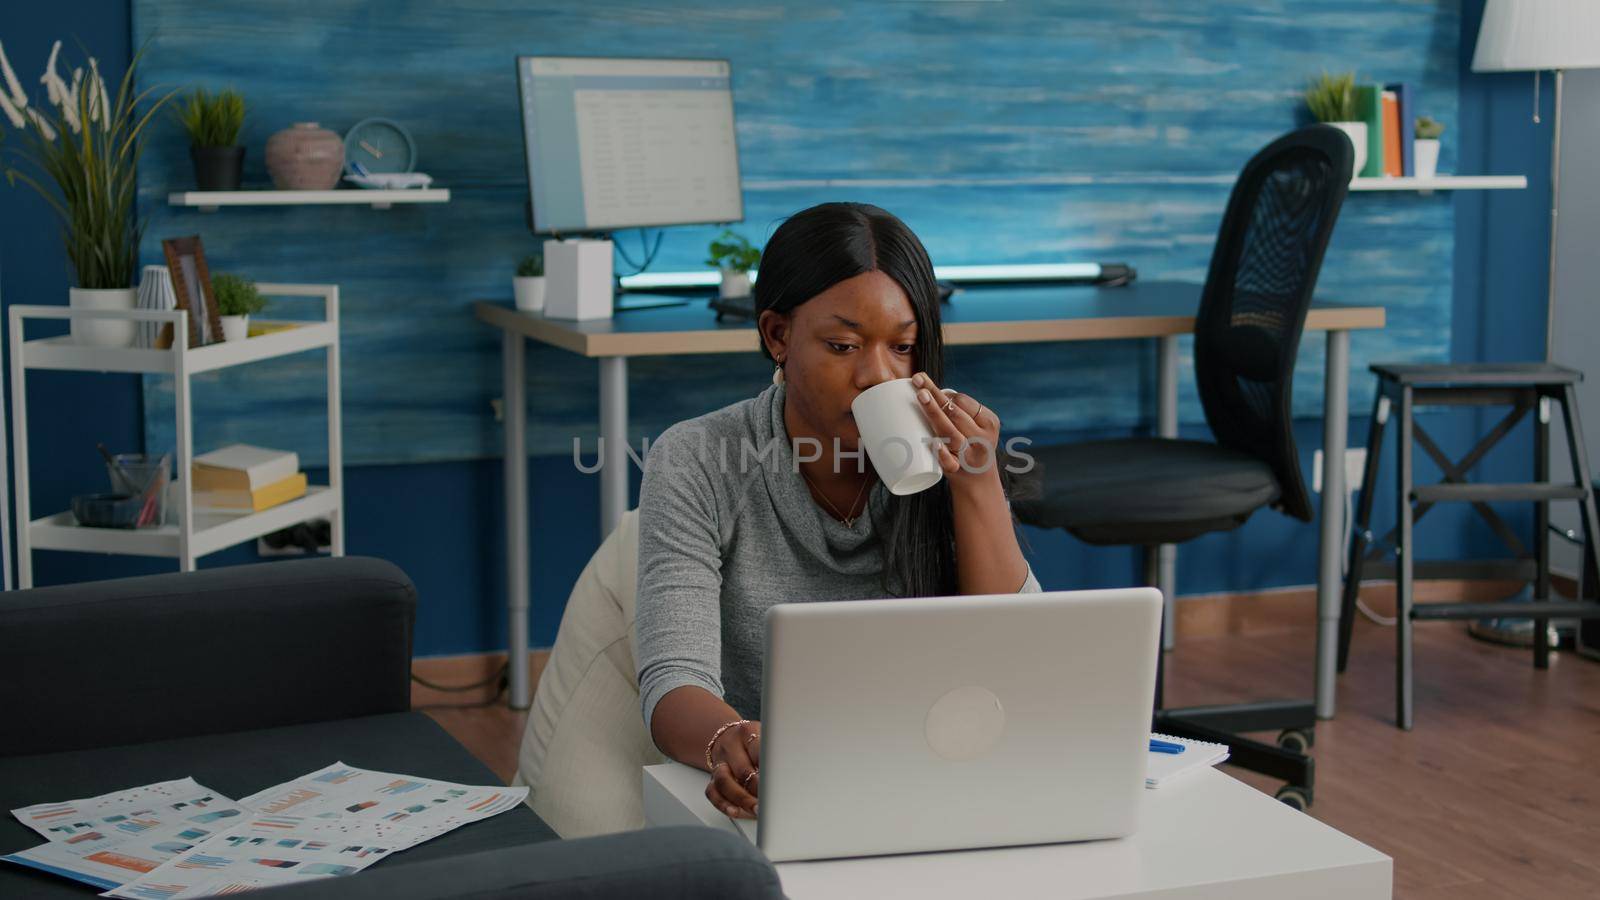 Black student drinking coffee typing social media article browsing lecture communication webinar on laptop working in living room. Young woman solving problem typing education email